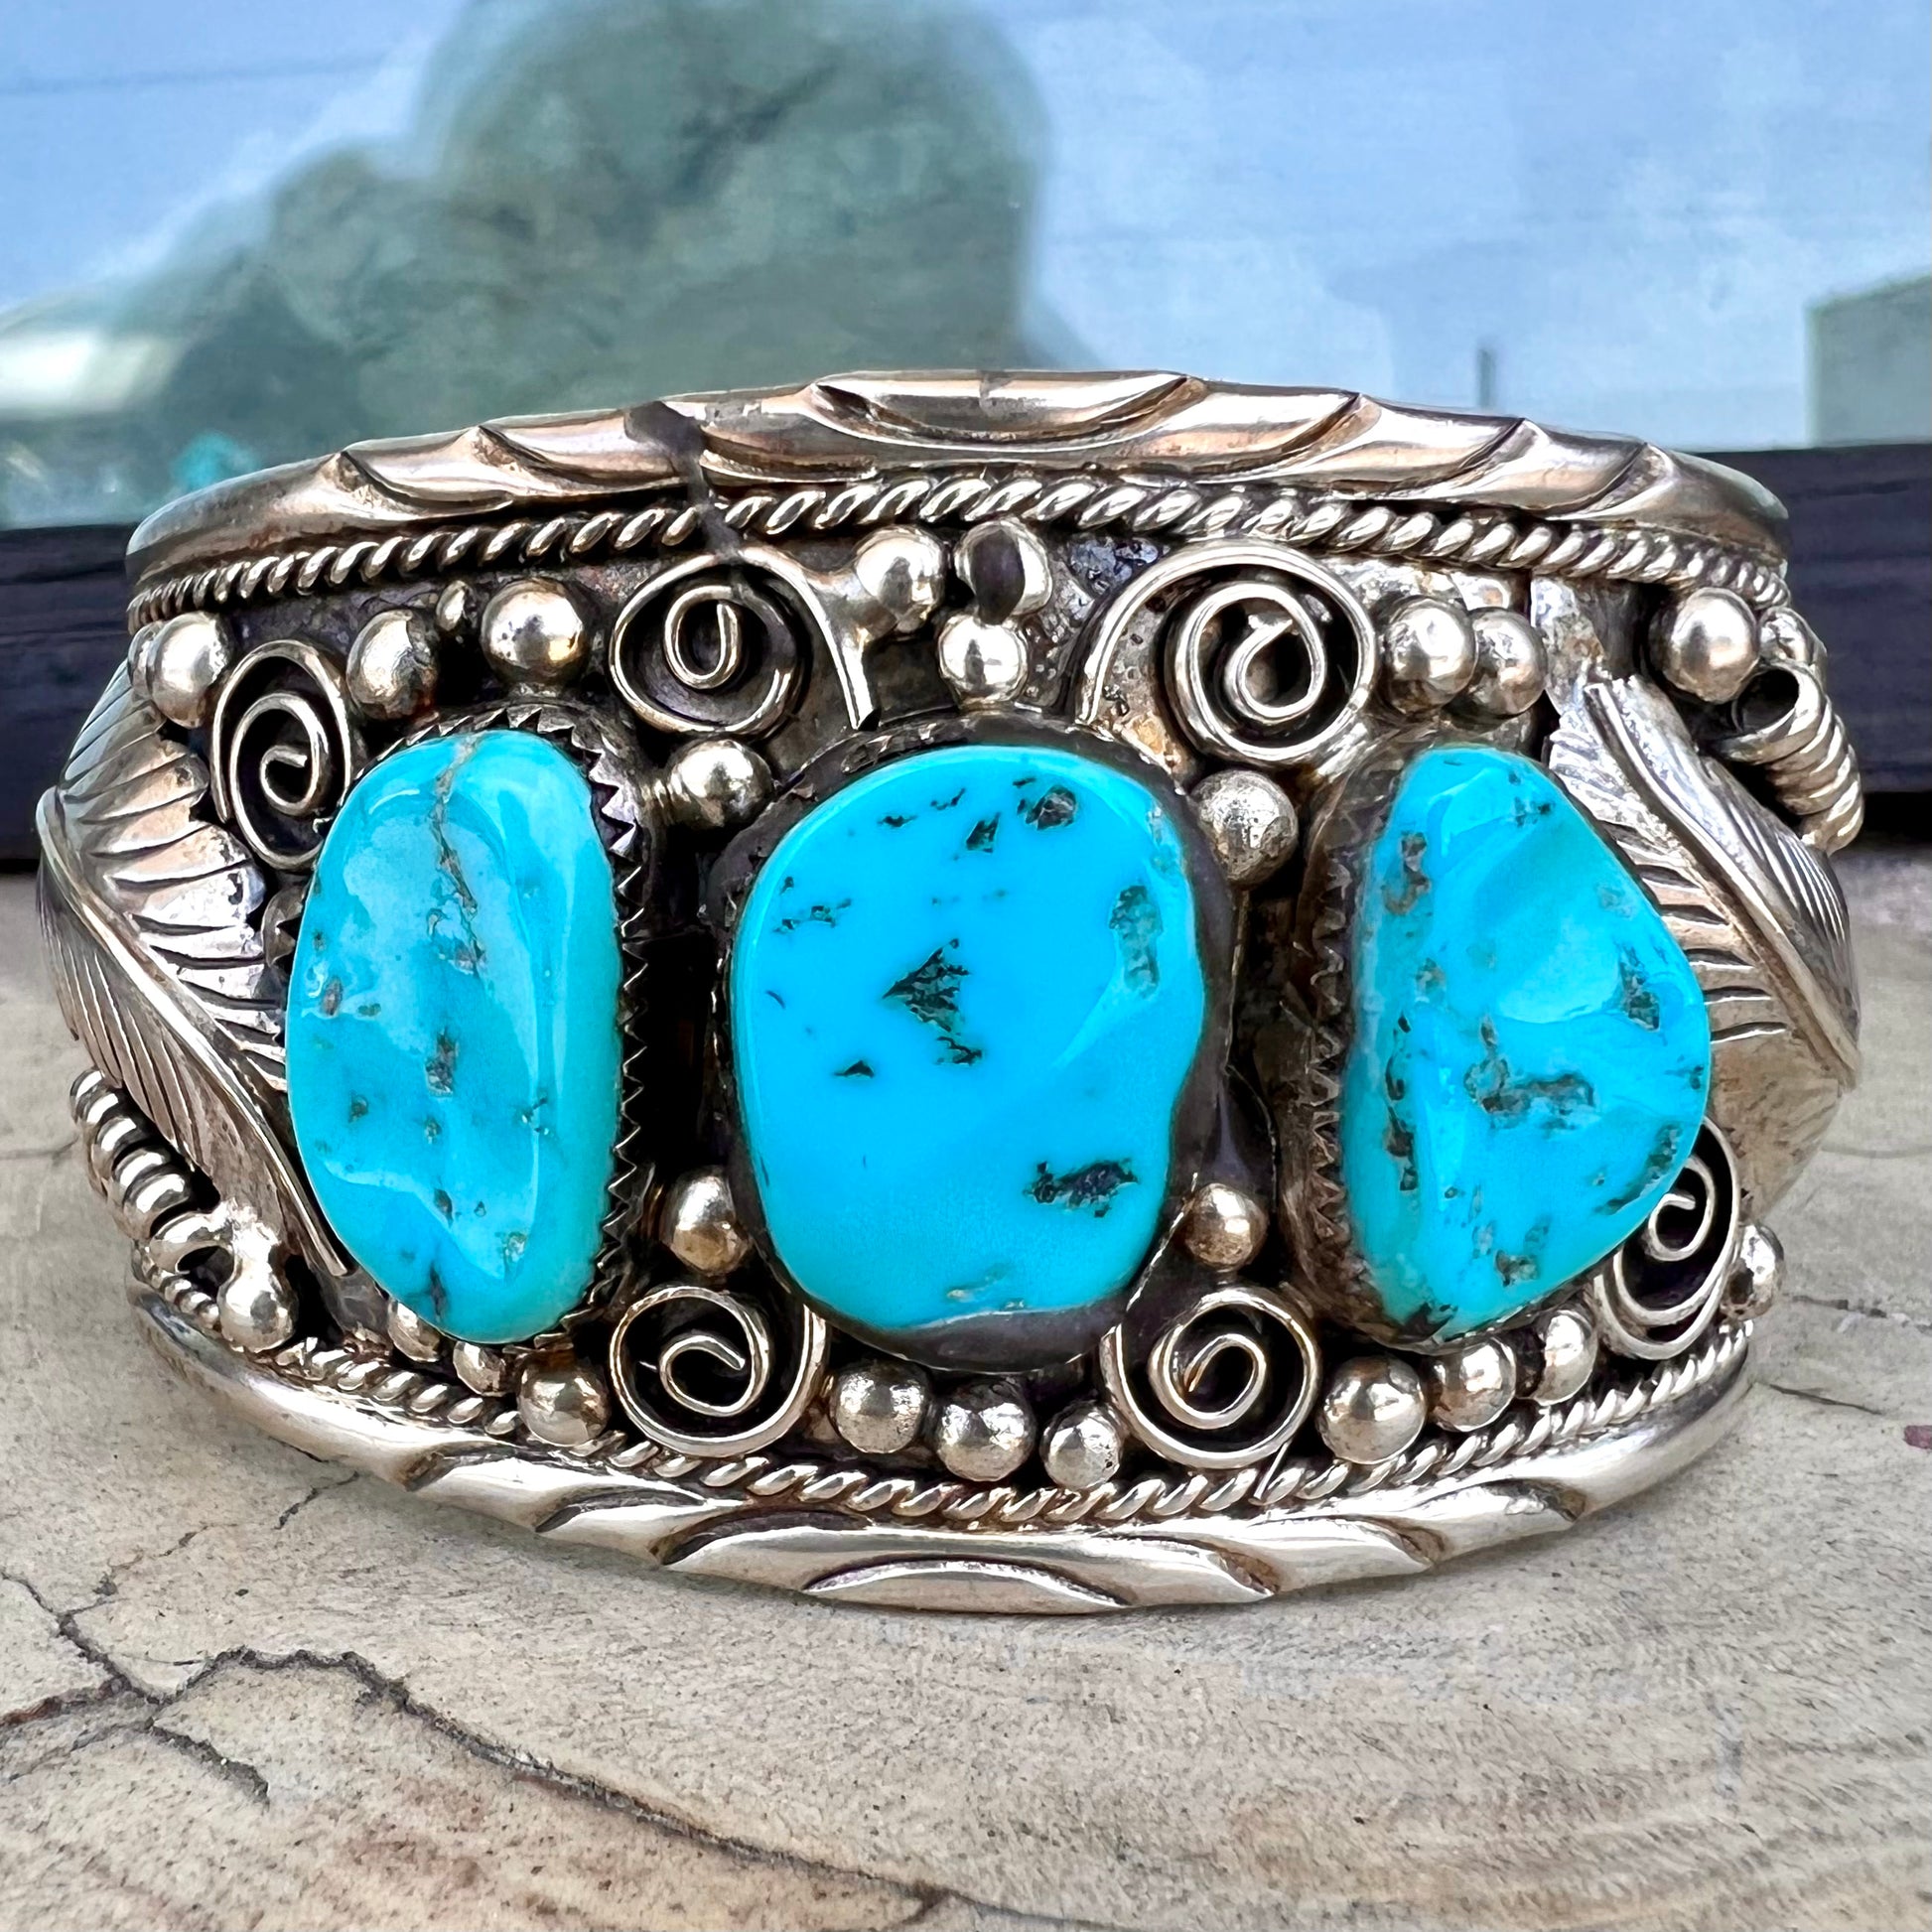 Trunk HOM Plumes (Turquoise)